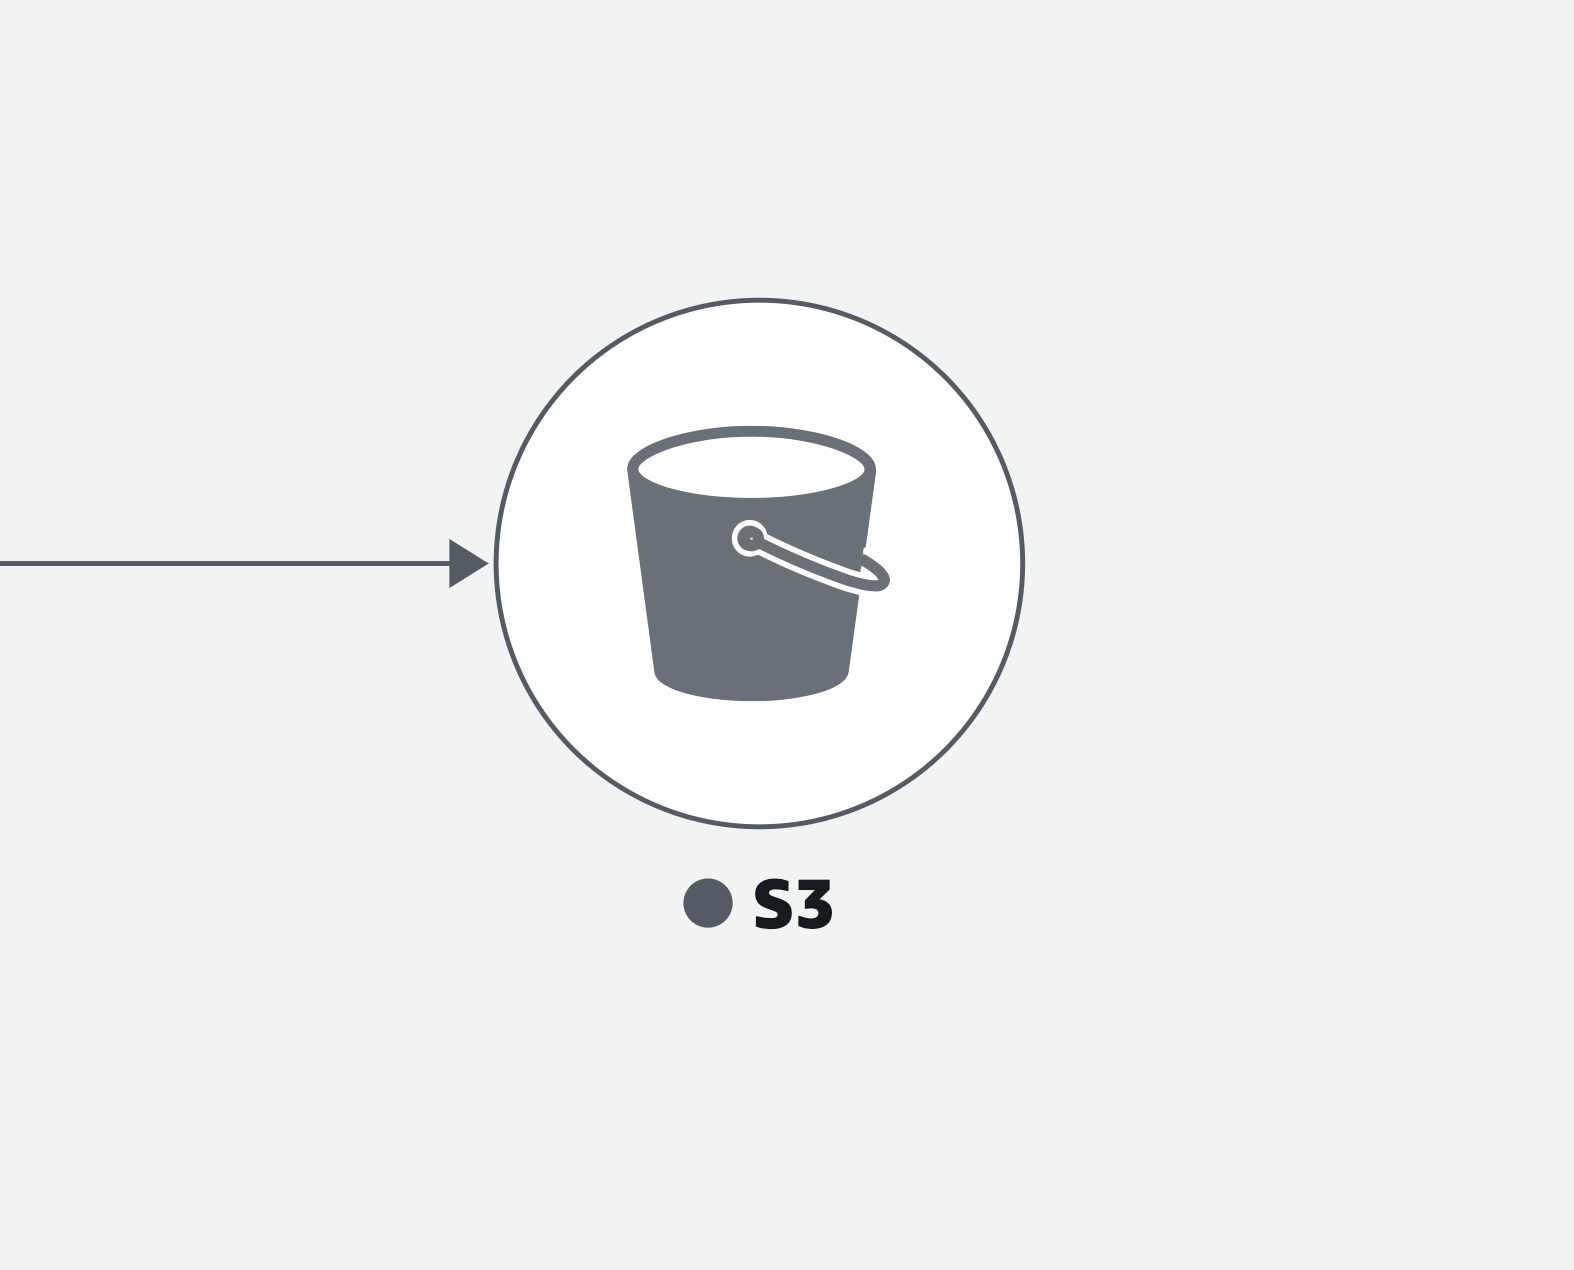 The icon for an Amazon S3 bucket.